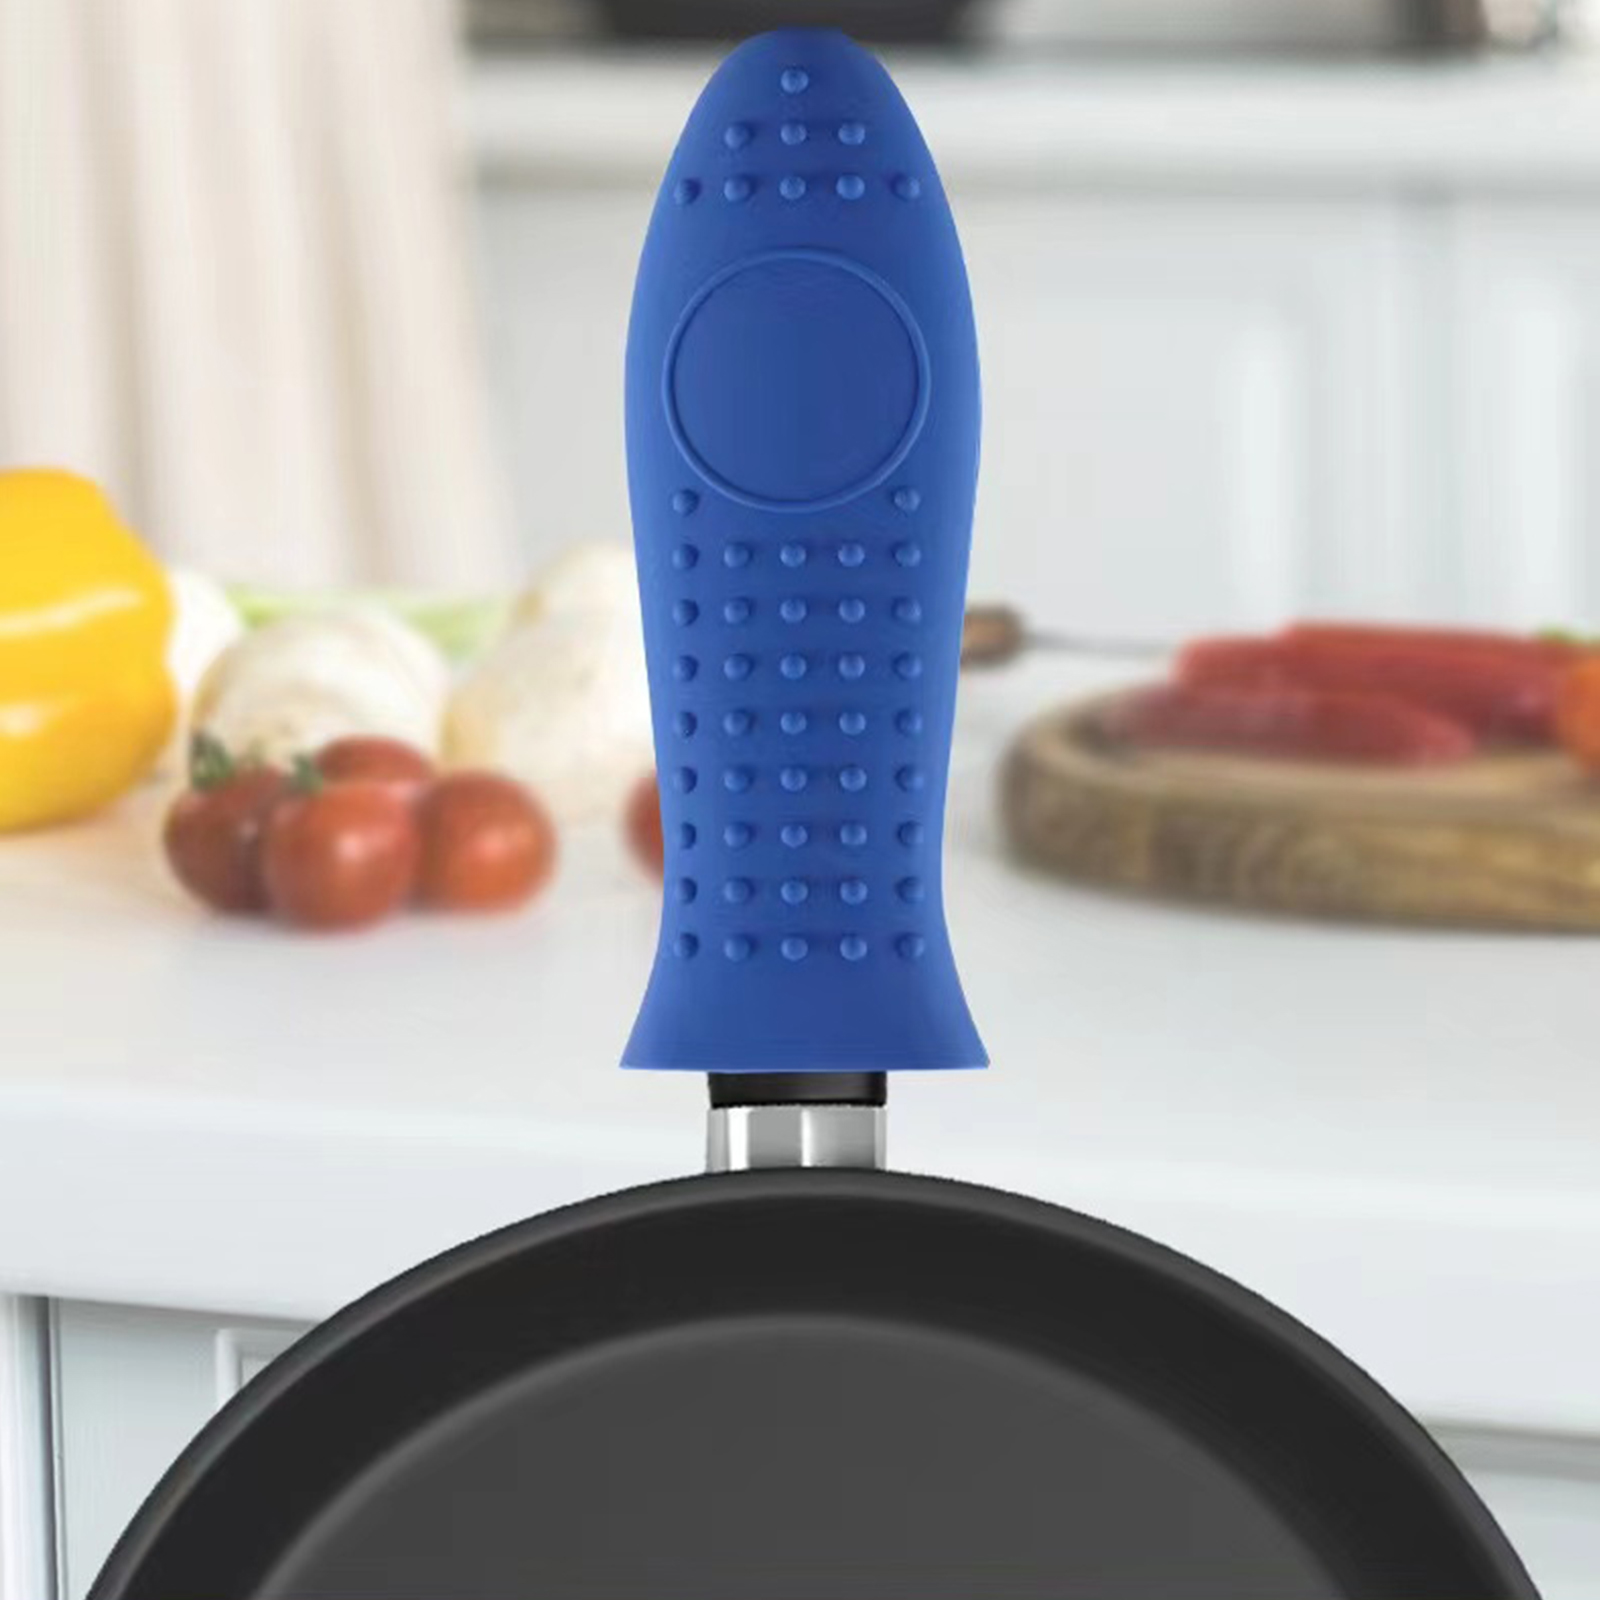 Silicone Pot Handle Heat Insulation Sleeve Cast Iron Pan Frying